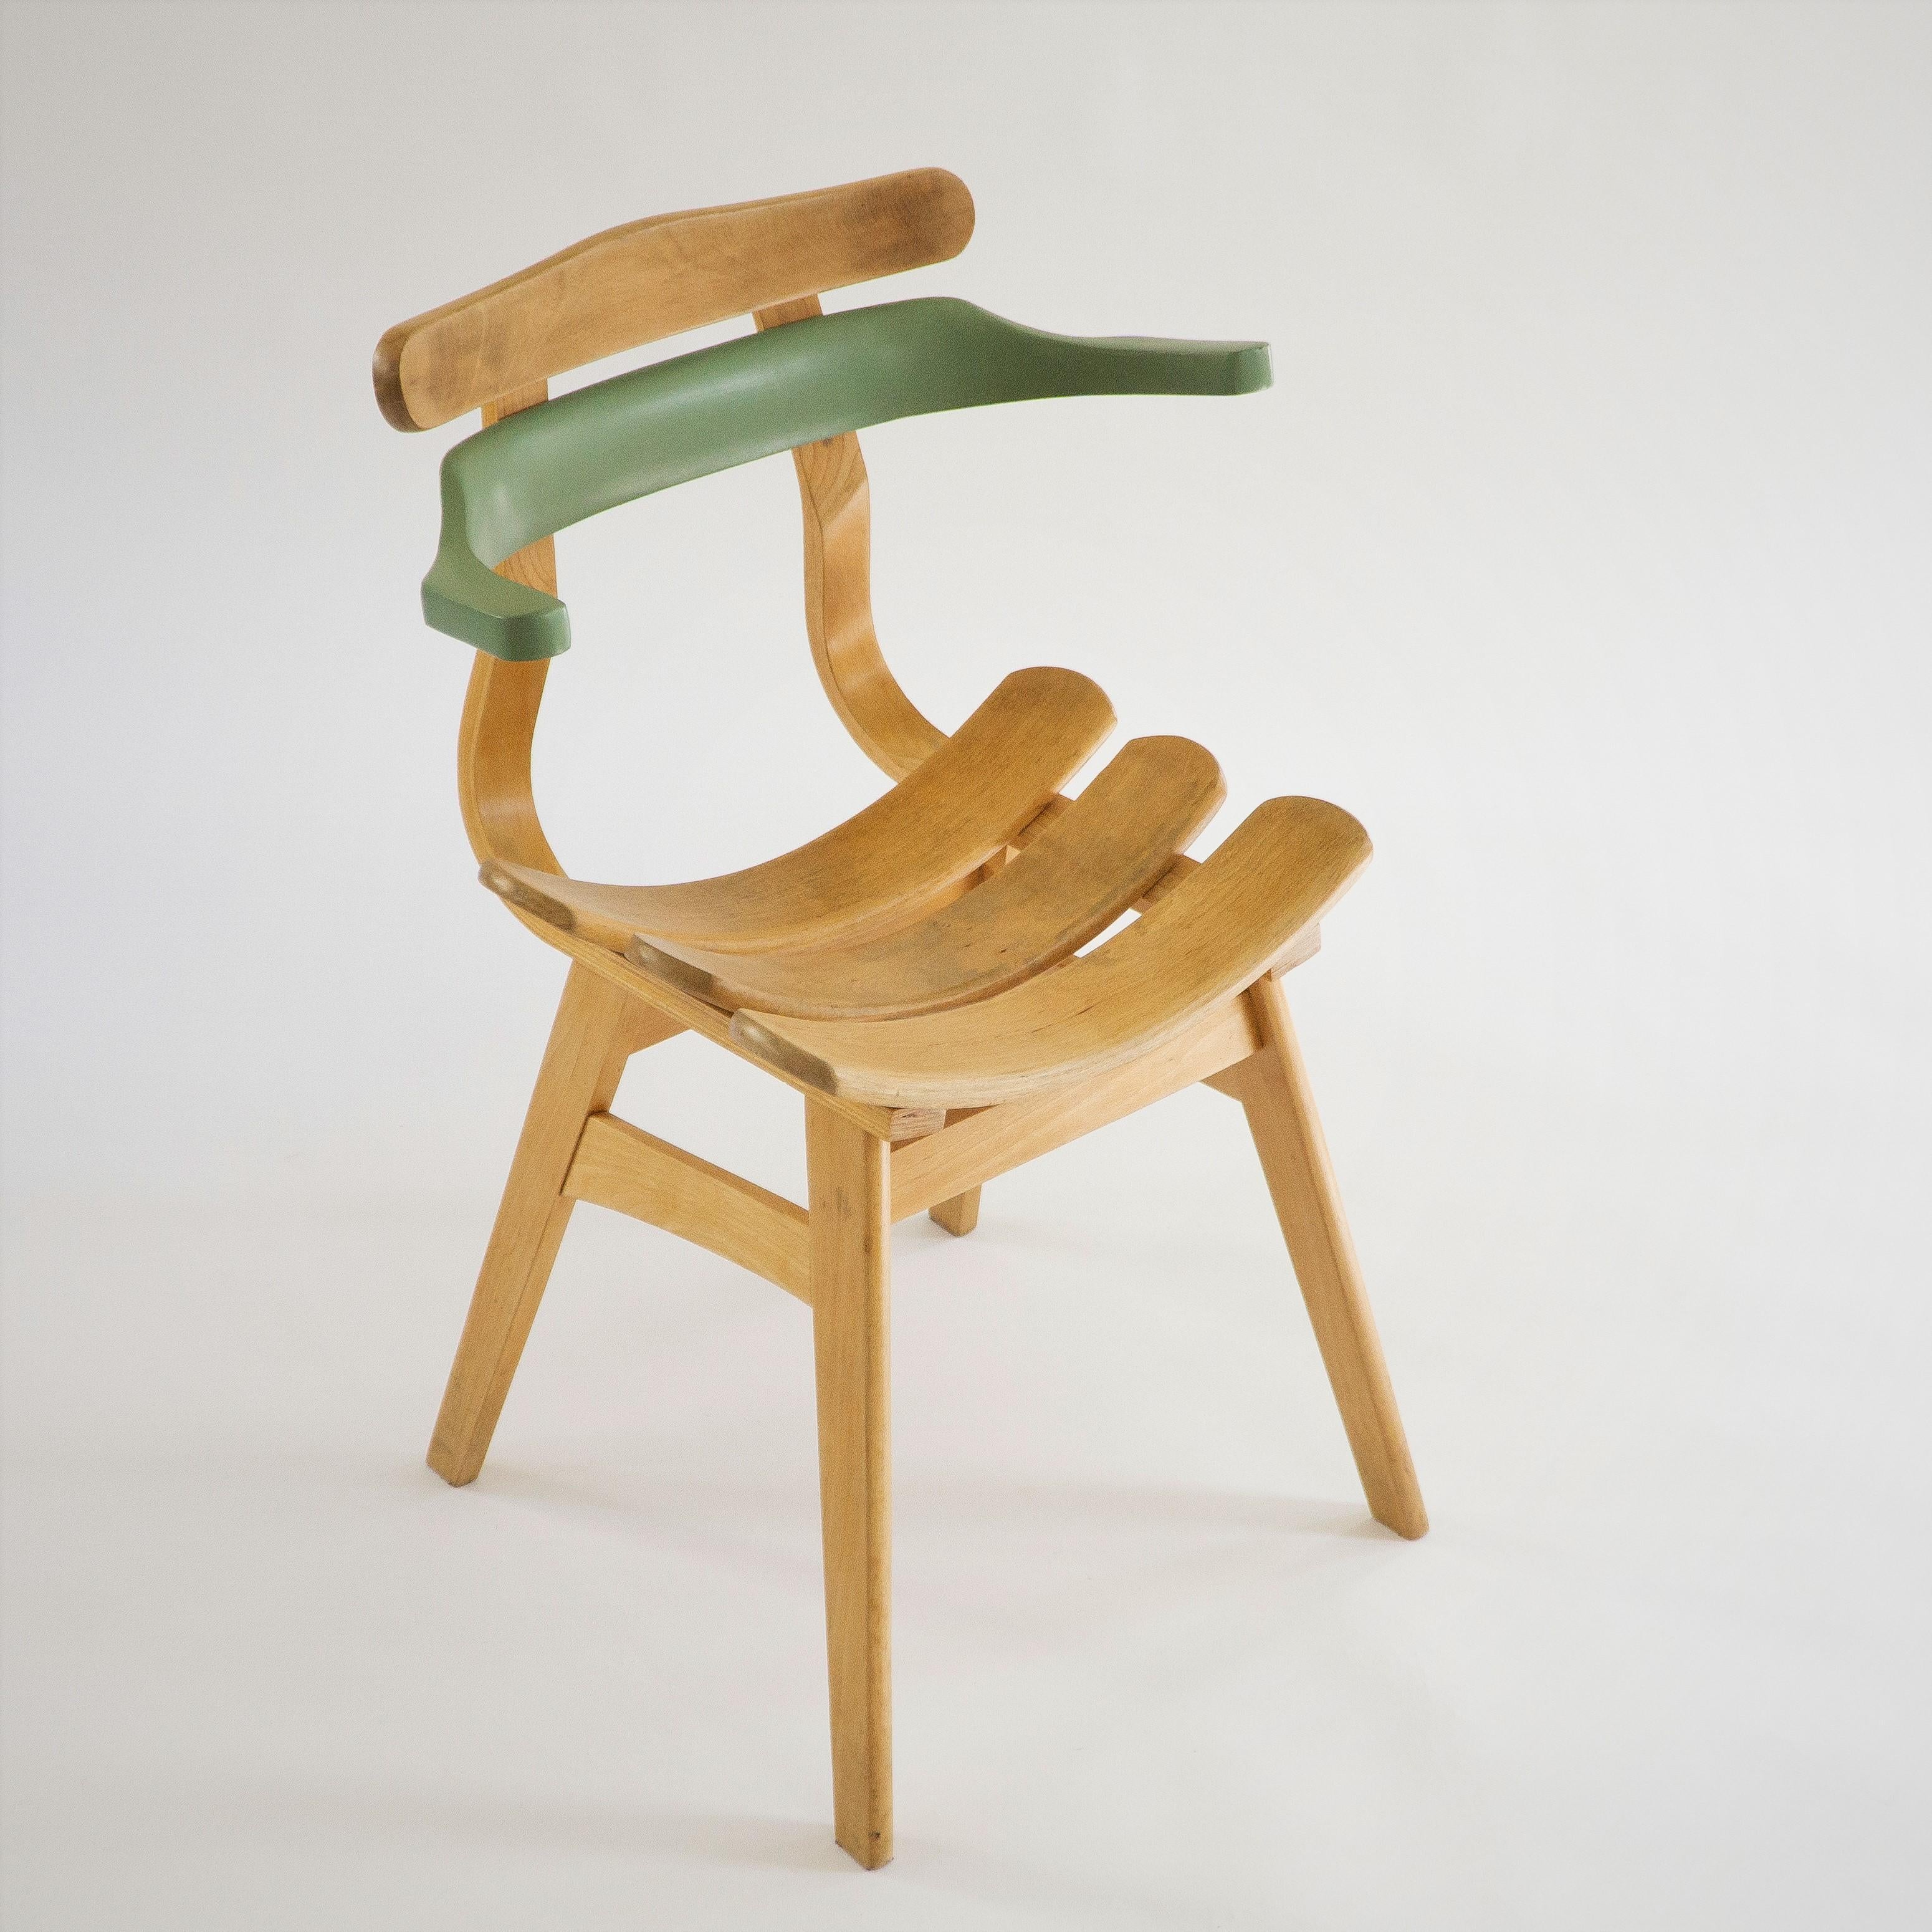 The Green Line Chairs is a unique set of living room or dining room chairs, upcycled by PUNKT Workshop from part of many different reinvented vintage chairs.

The Green Line Chairs is a handcrafted set of reclaimed solid wood accent chairs,